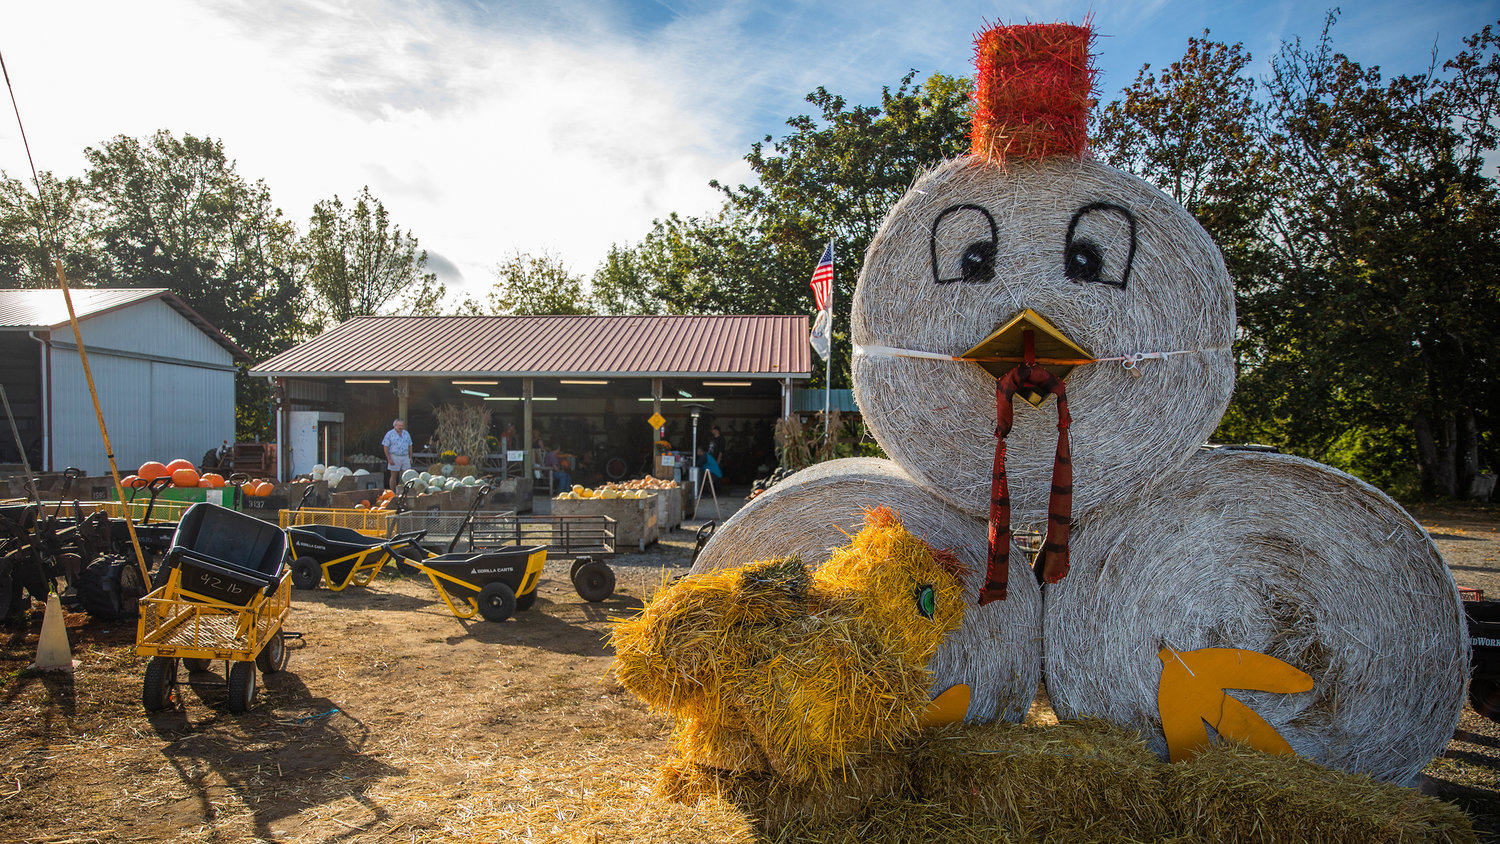 Hay bales are organized into the shape of chickens at the Goodrich Road Pumpkin Patch in Centralia on Monday.